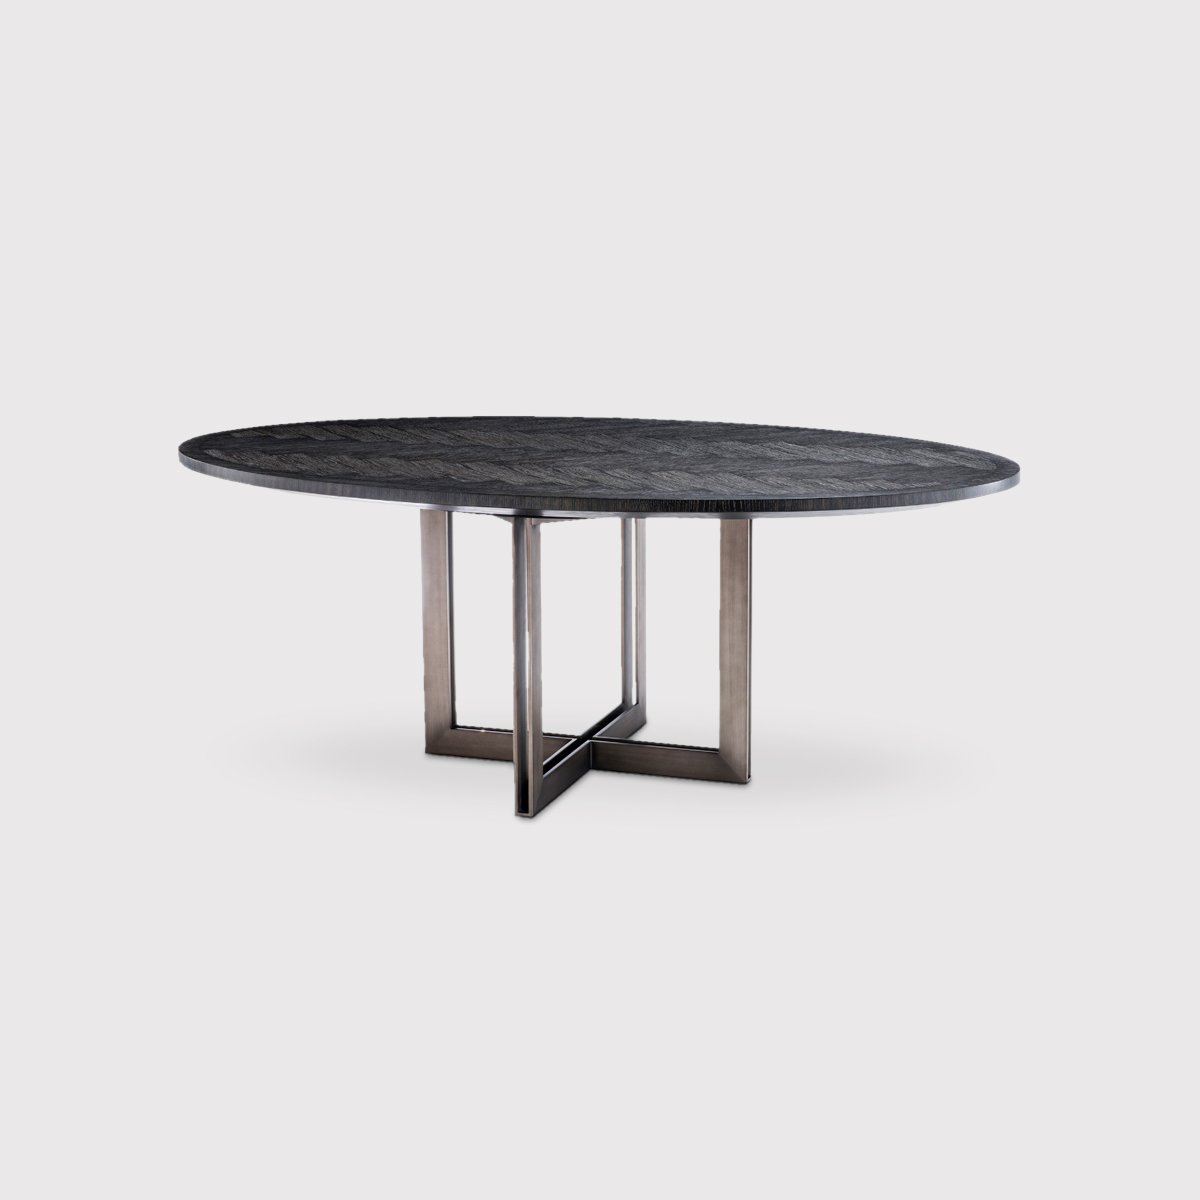 Eichholtz Melchior Dining Table Oval, Round, Black | Barker & Stonehouse